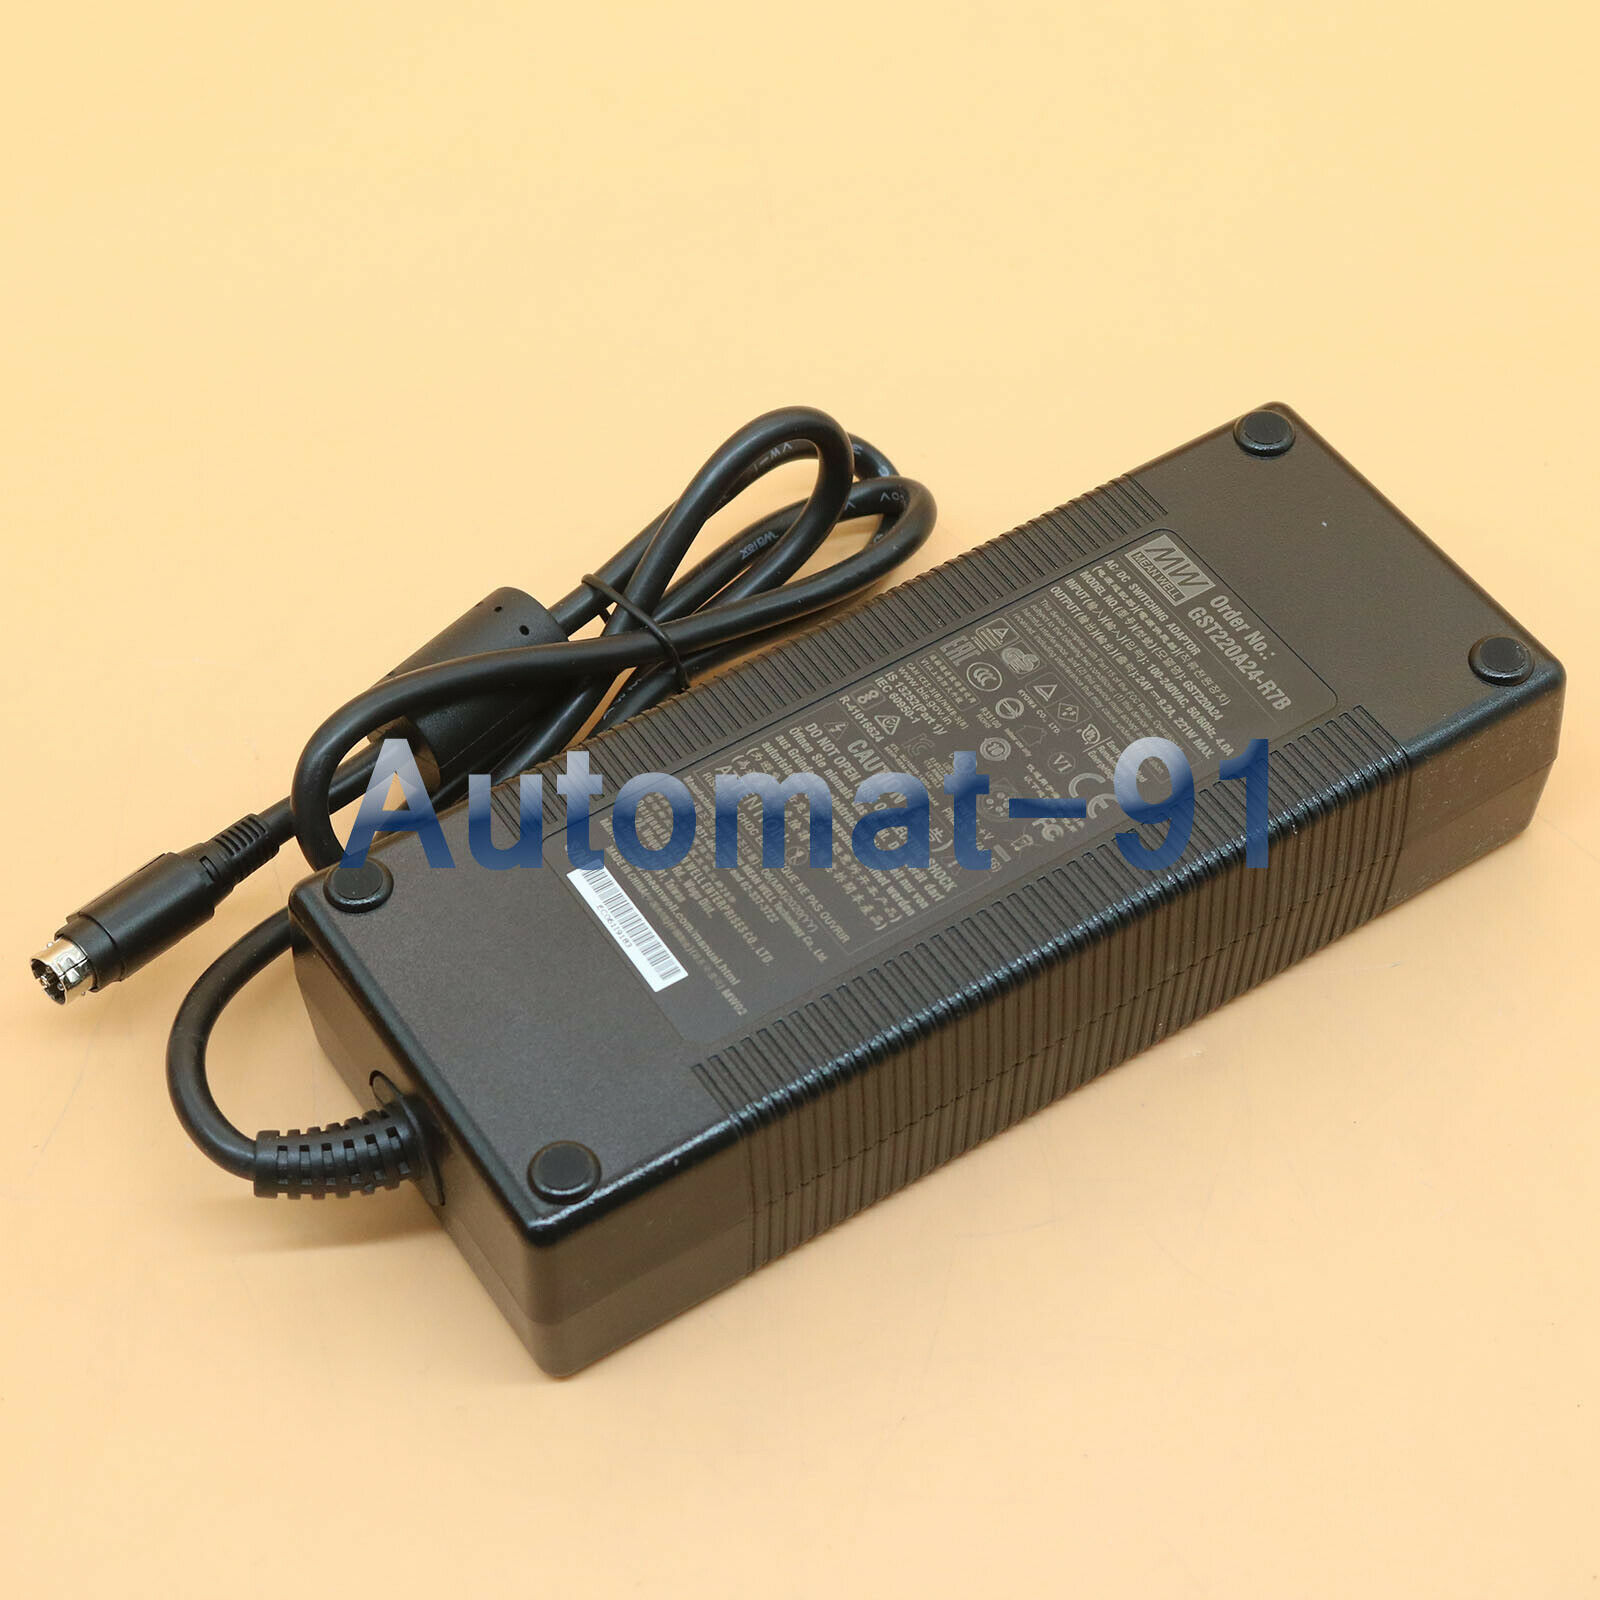 *Brand NEW* KUANTEN Model KT56W280200M2 DR-6360 LED Nail Lamp 28V AC DC Adapter Charger - Click Image to Close